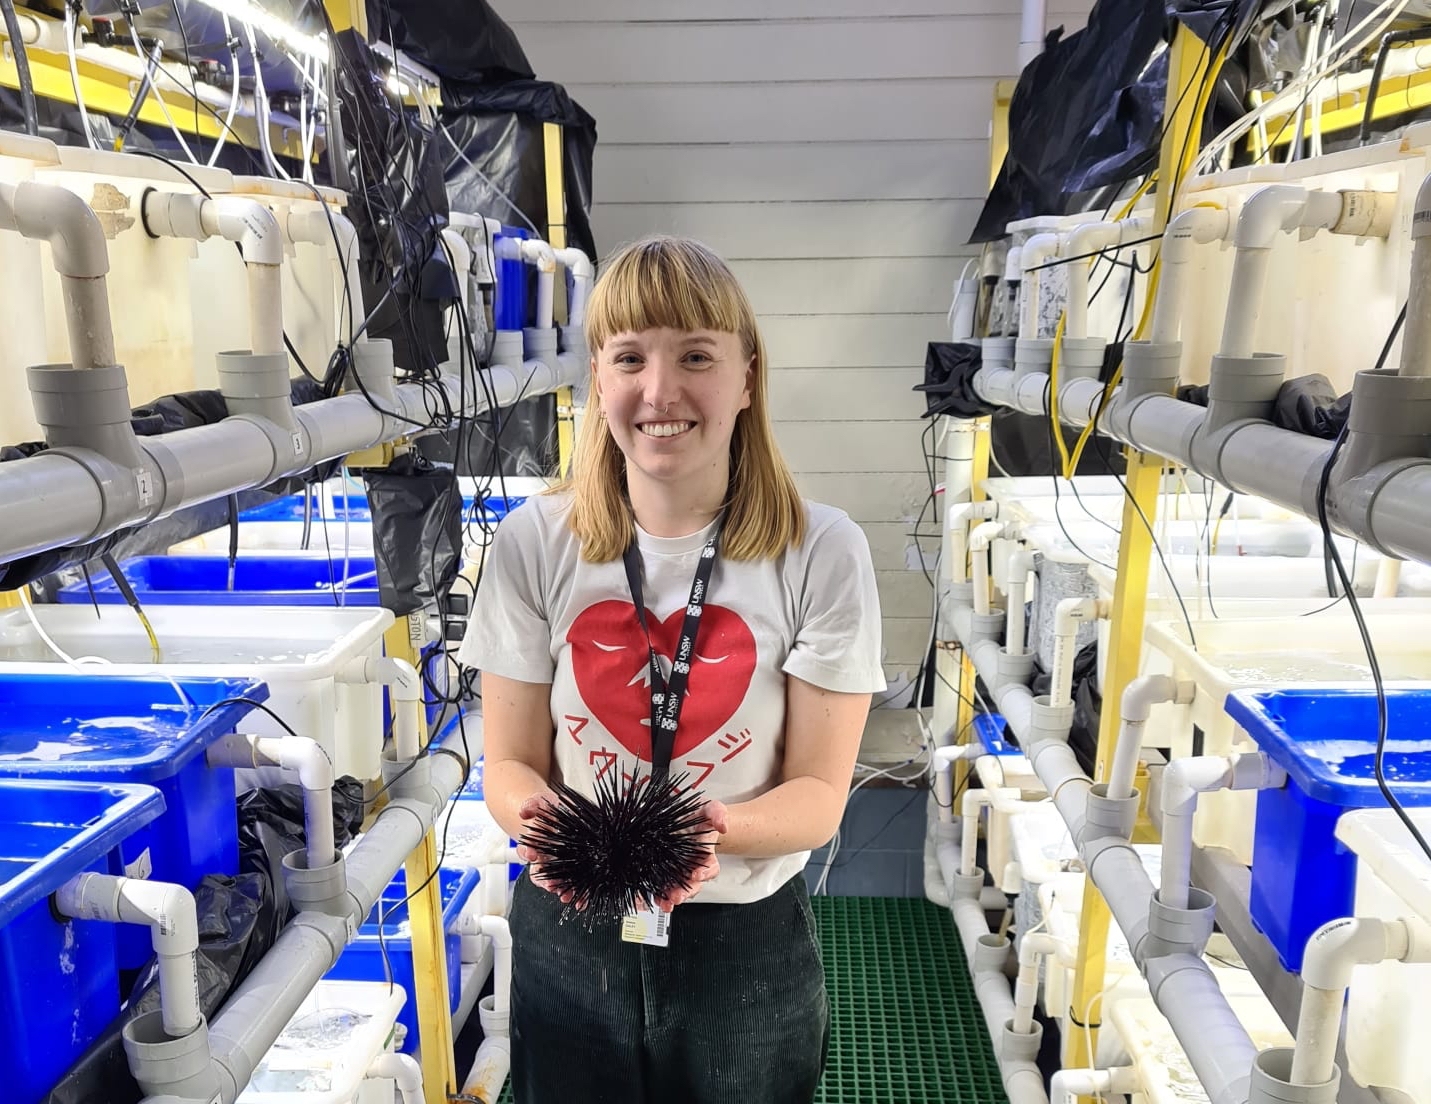 Credit: Milly Caley - Milly Caley with the experimental set up at the Sydney Institute of Marine Science, Sydney, Australia